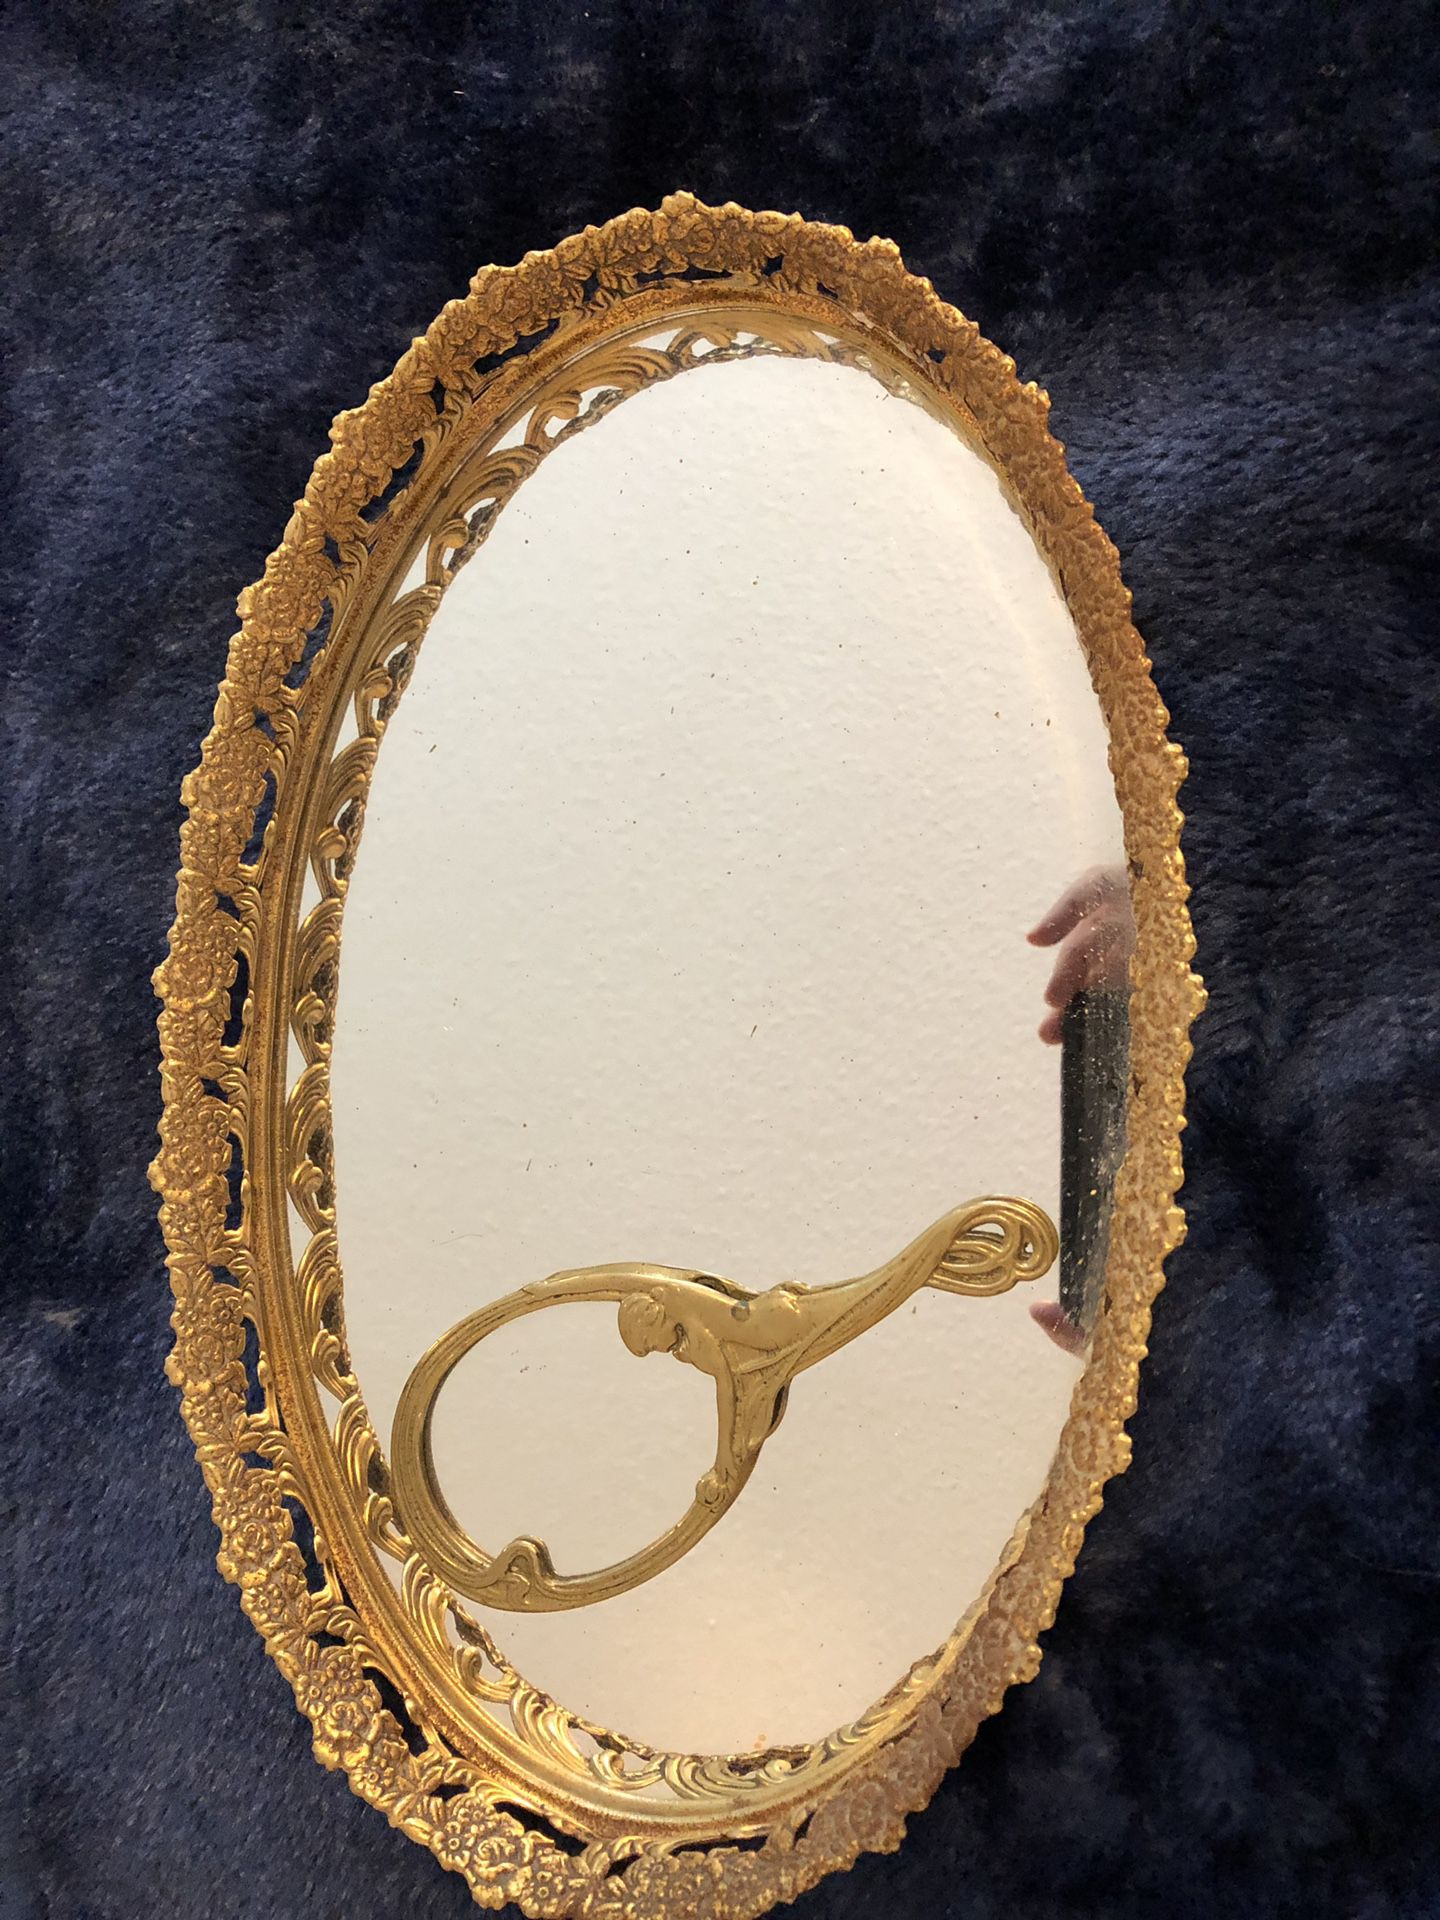 Antique mirrored vanity tray and hand mirror